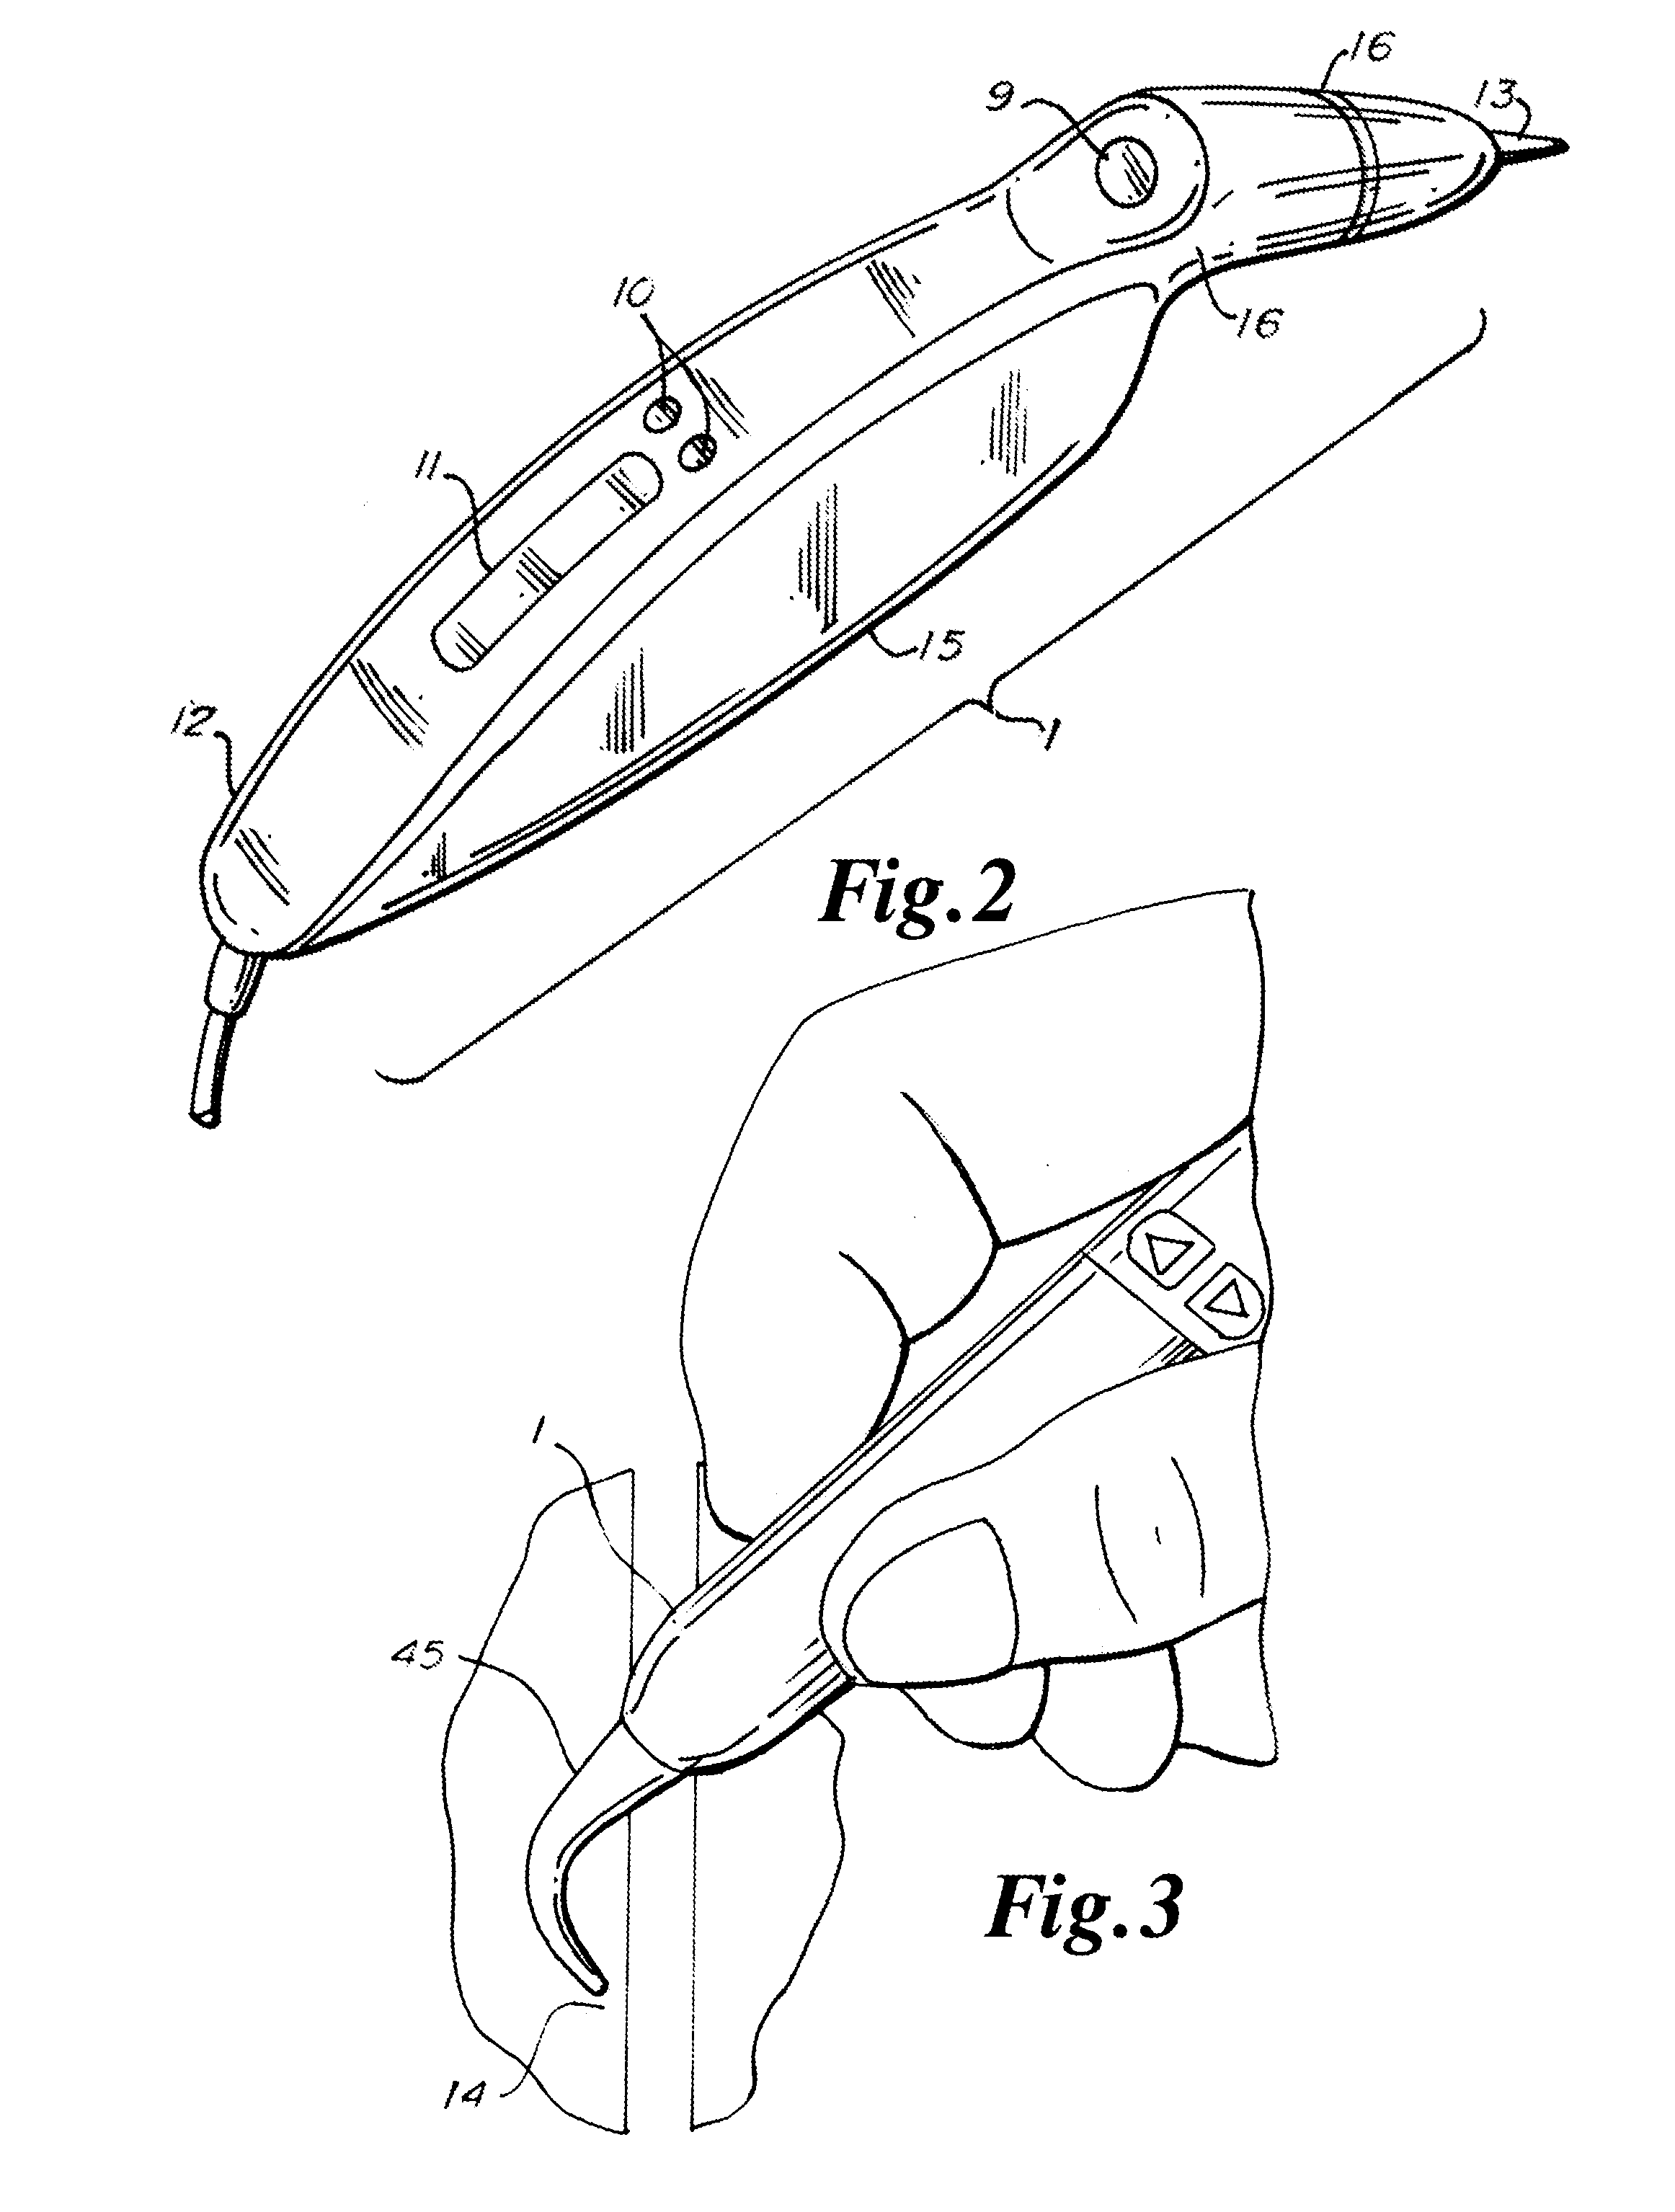 Computer aided canal instrumentation system and a unique endodontic instrument design